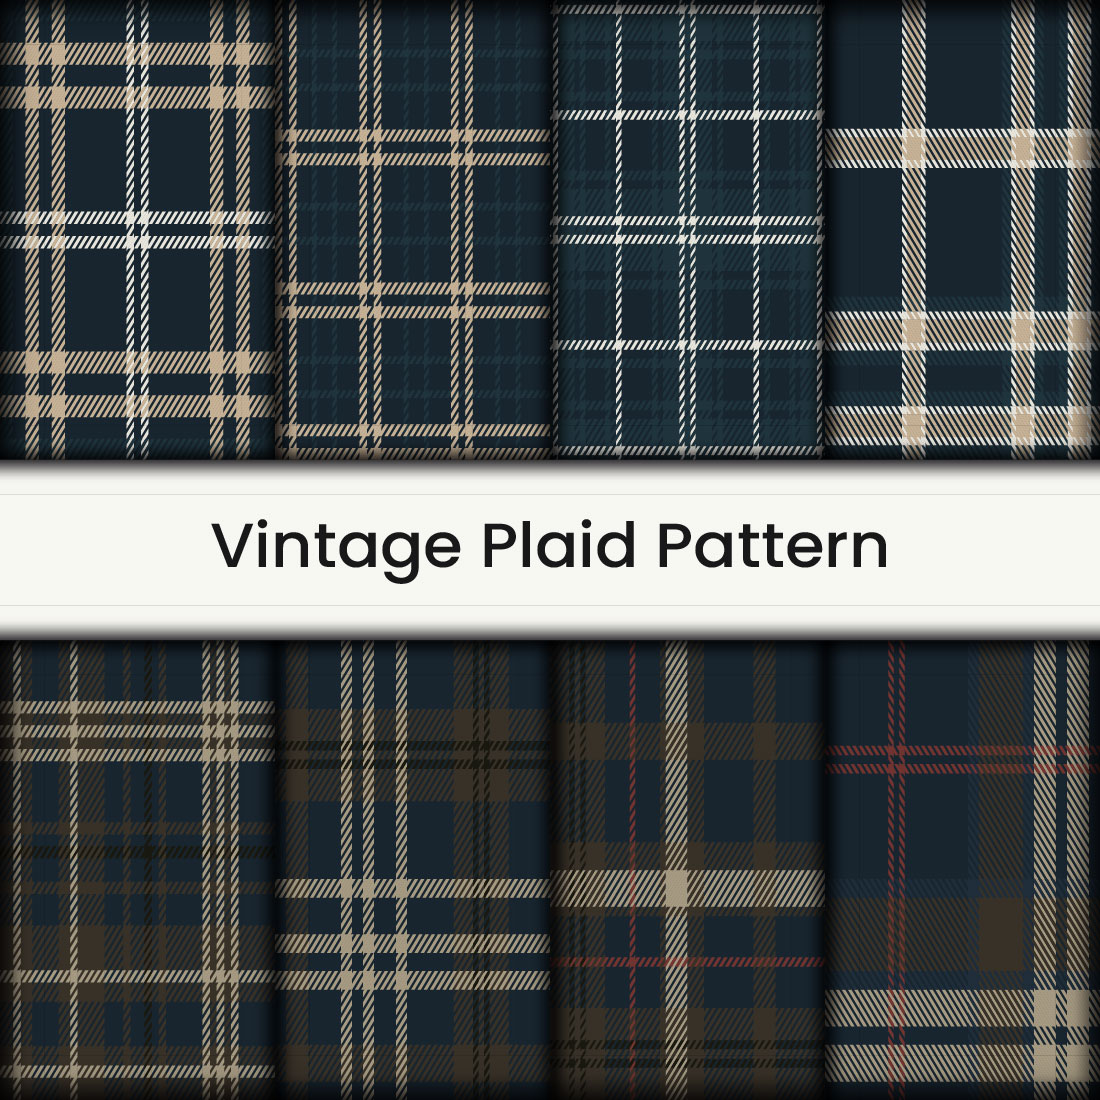 Bundle of check plaid pattern or scarf, blanket, throw, shirt other fashion textile design only $10 pinterest preview image.